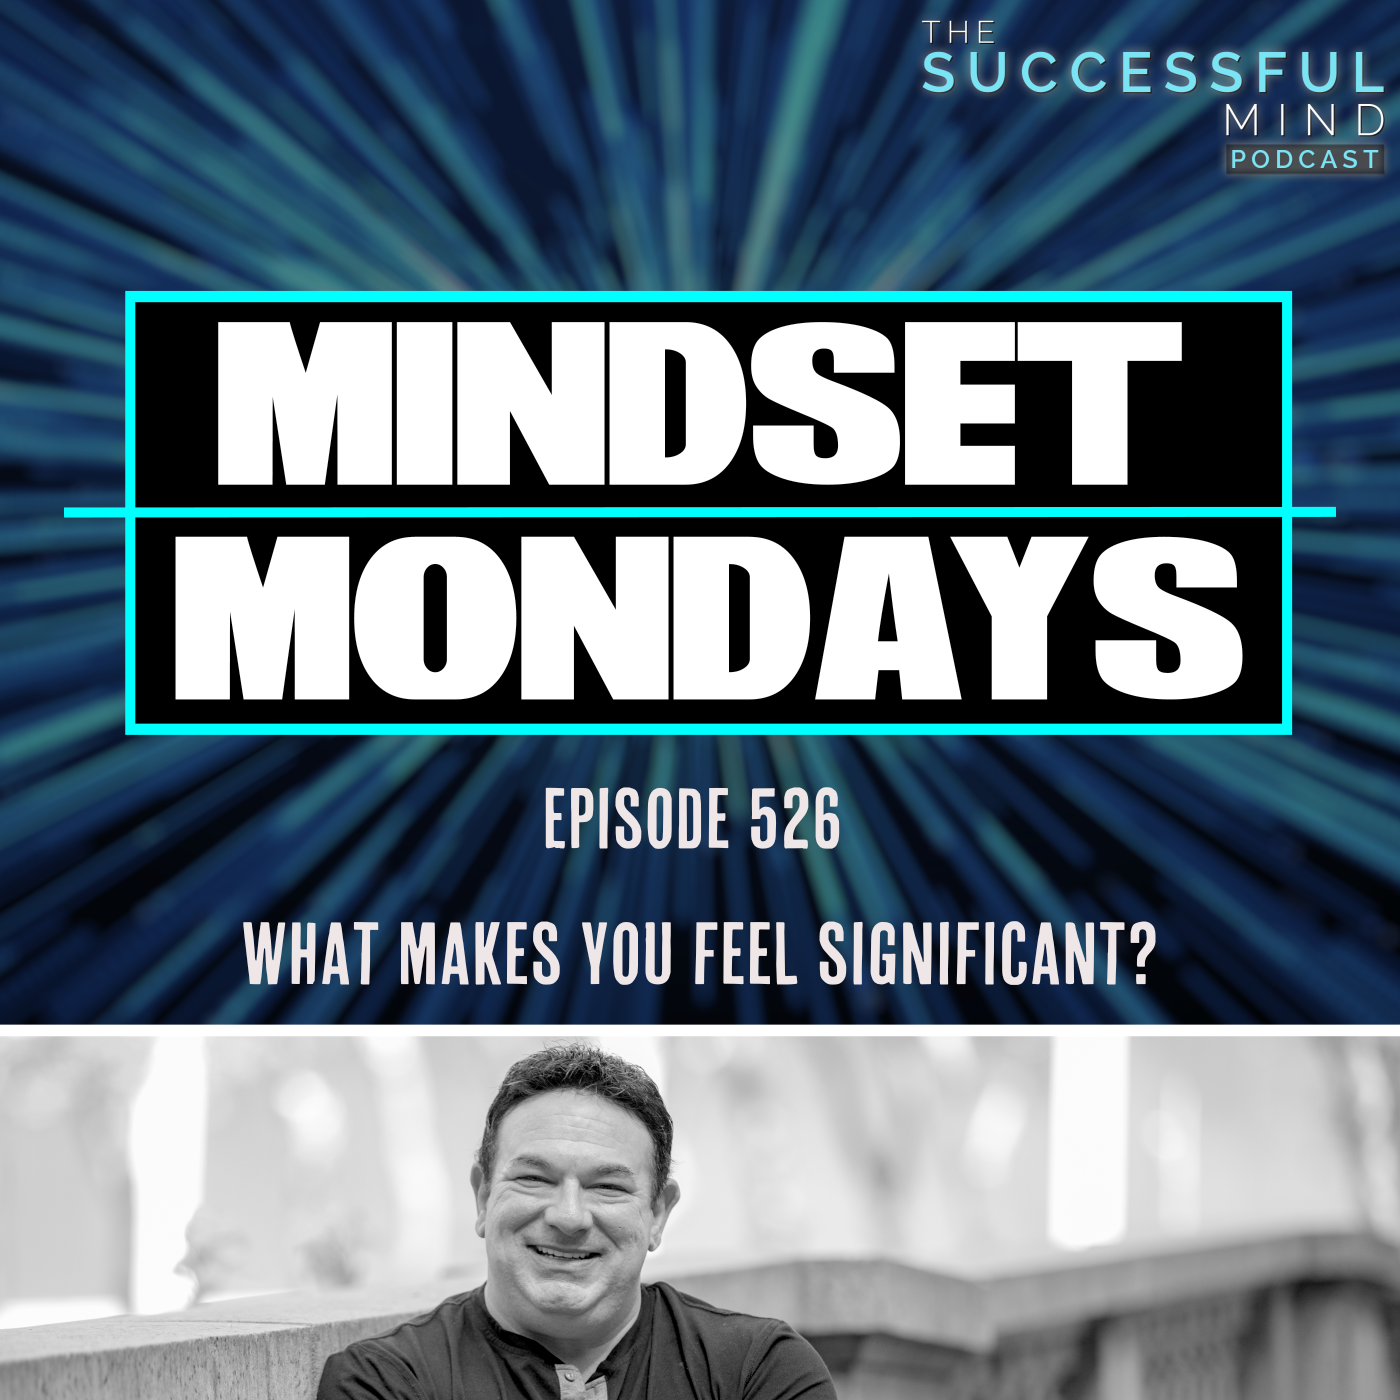 The Successful Mind Podcast - Episode 526 - What Makes You Feel Significant?